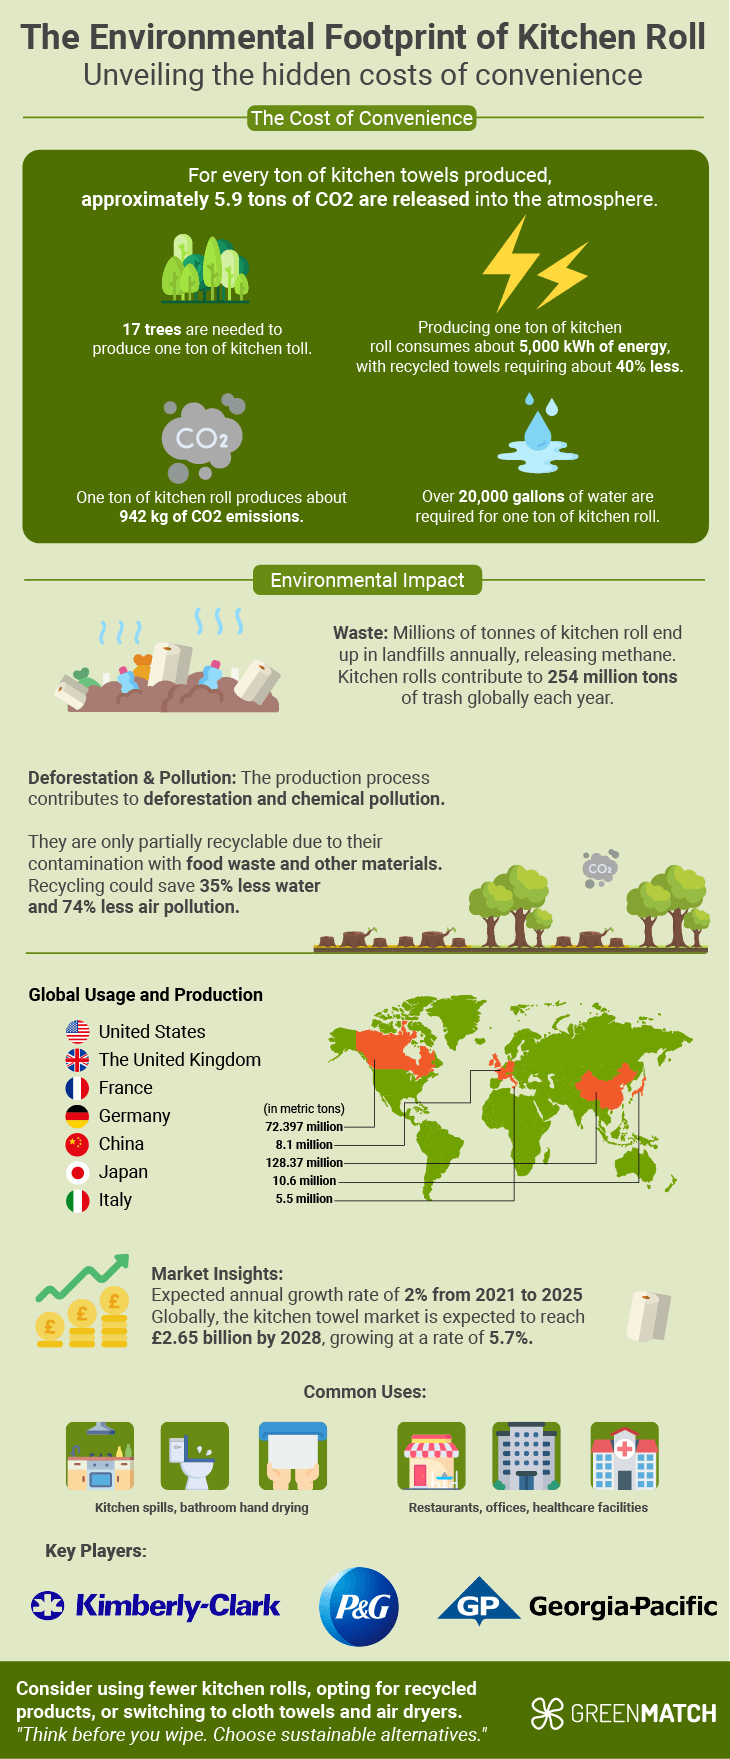 An infographic highlighting the environmental impact of kitchen roll usage, showcasing statistics on deforestation, water waste, and landfill contributions.